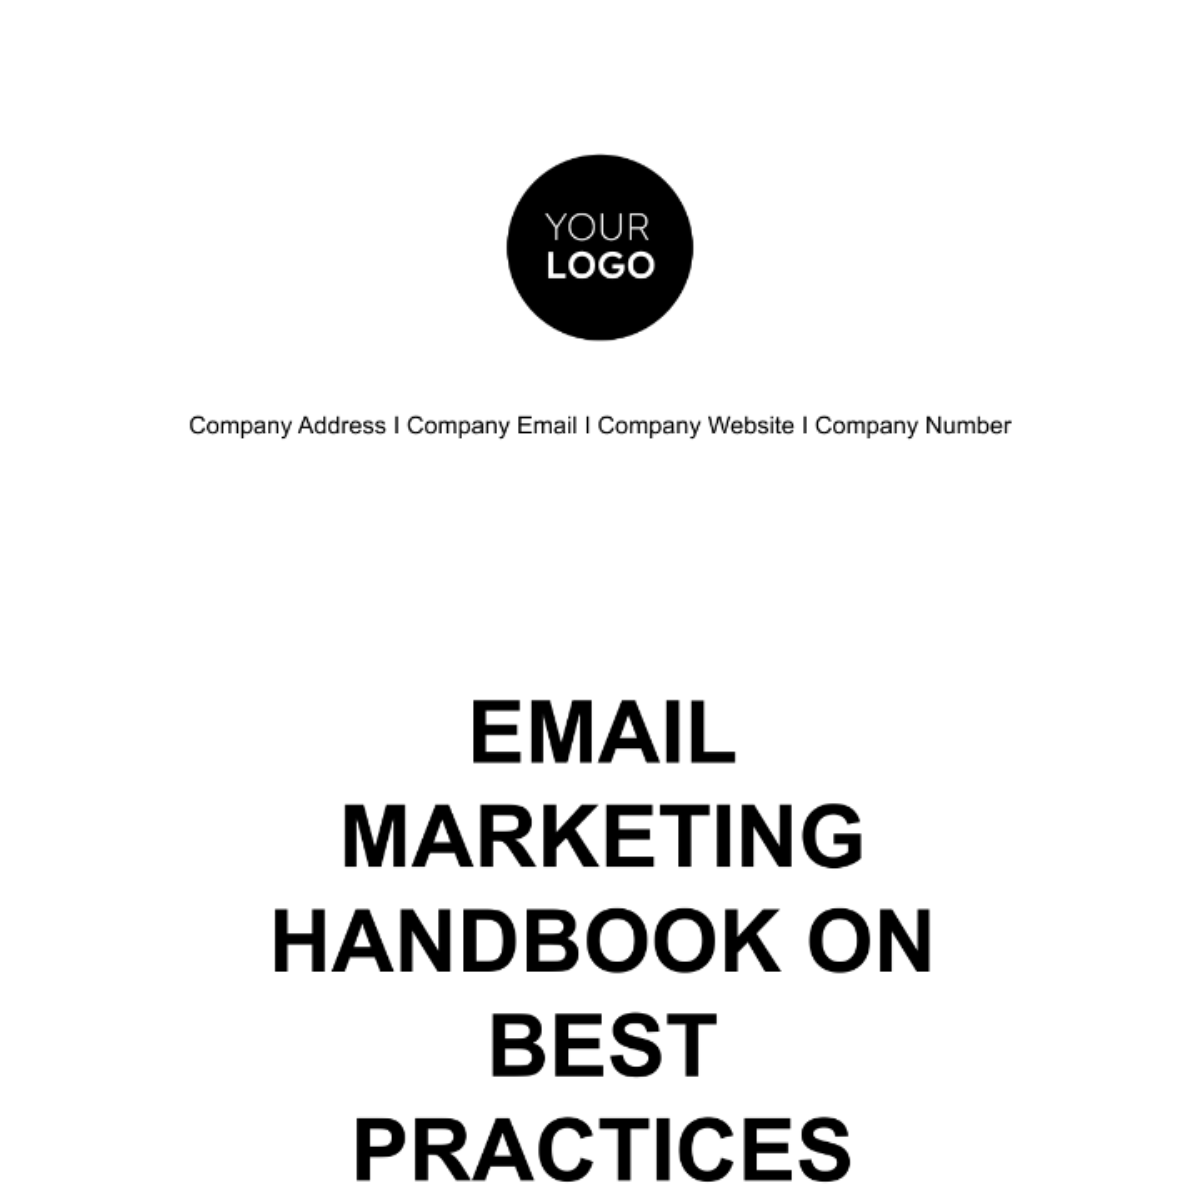 Free Email Marketing Handbook on Best Practices Template